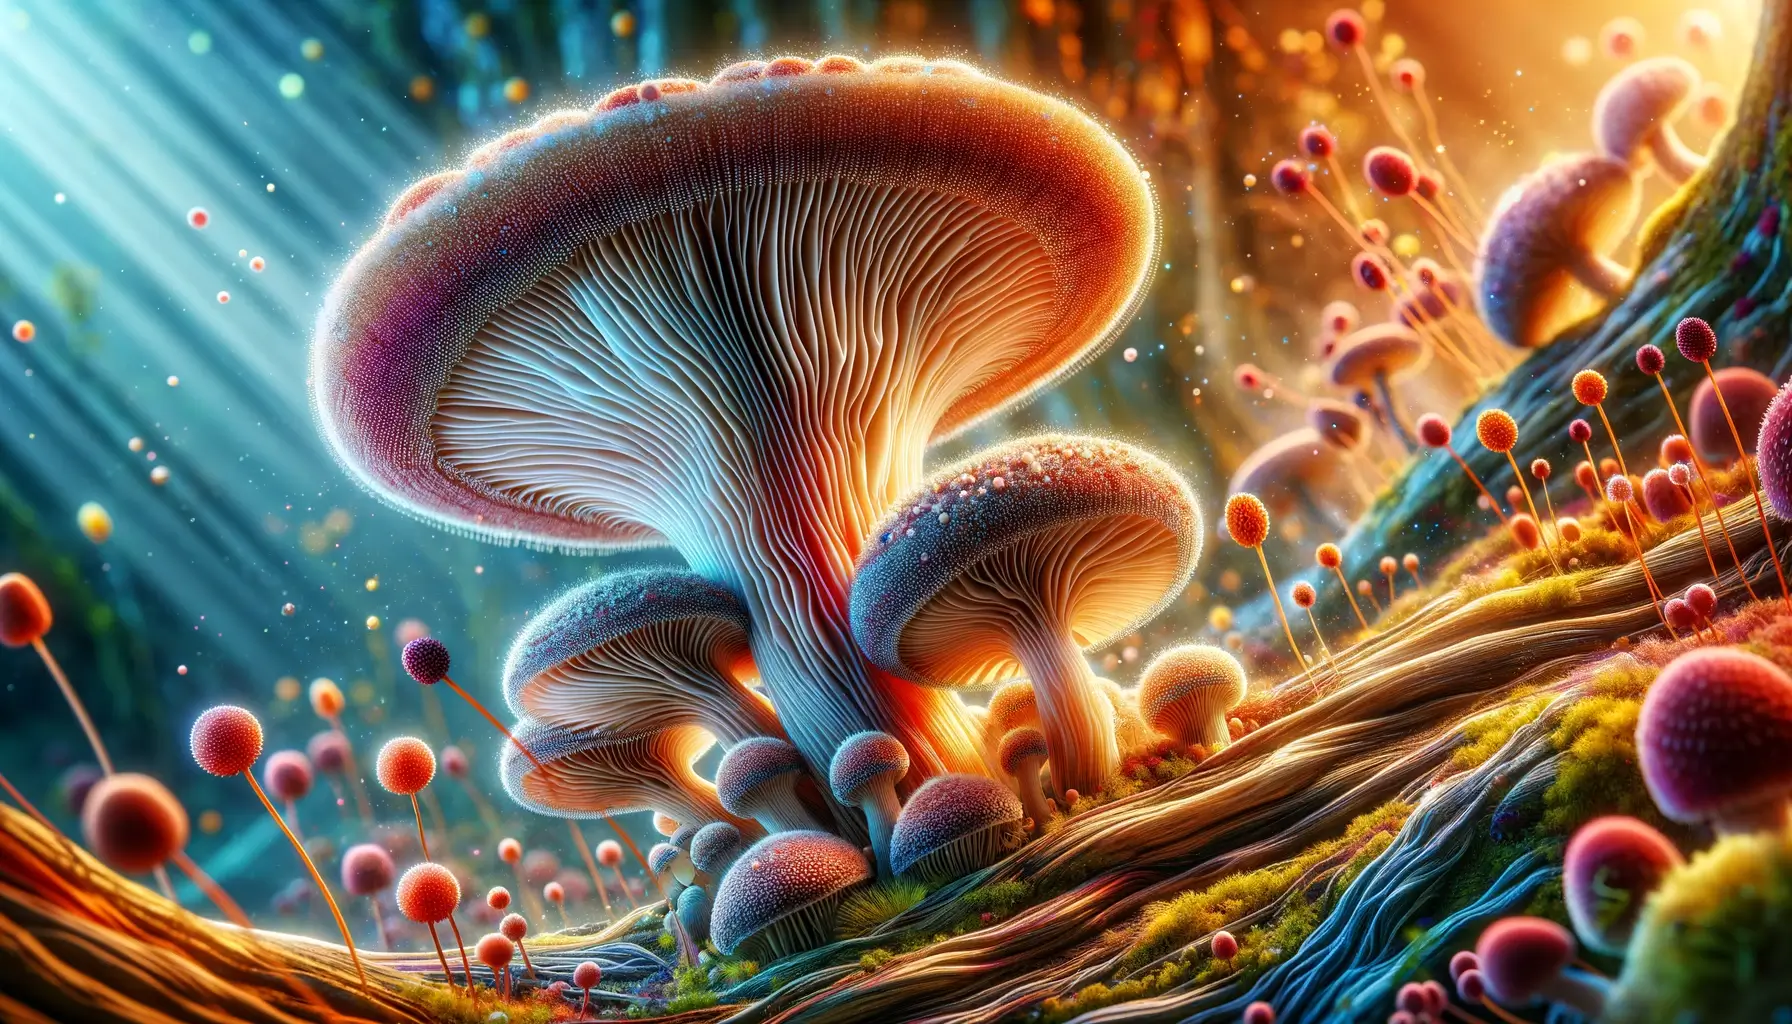 A stunning, detailed image of mushrooms in their natural habitat, highlighting the specific parts like gills, pores, or teeth from which spores are released. The scene is rich in colors and textures, showcasing a vibrant ecosystem with a focus on the mushroom's intricate structures. This image serves as an engaging and informative visual for 'Where Do Mushroom Spores Come From' and invites the viewer to explore the origins of mushroom spores in a natural setting.